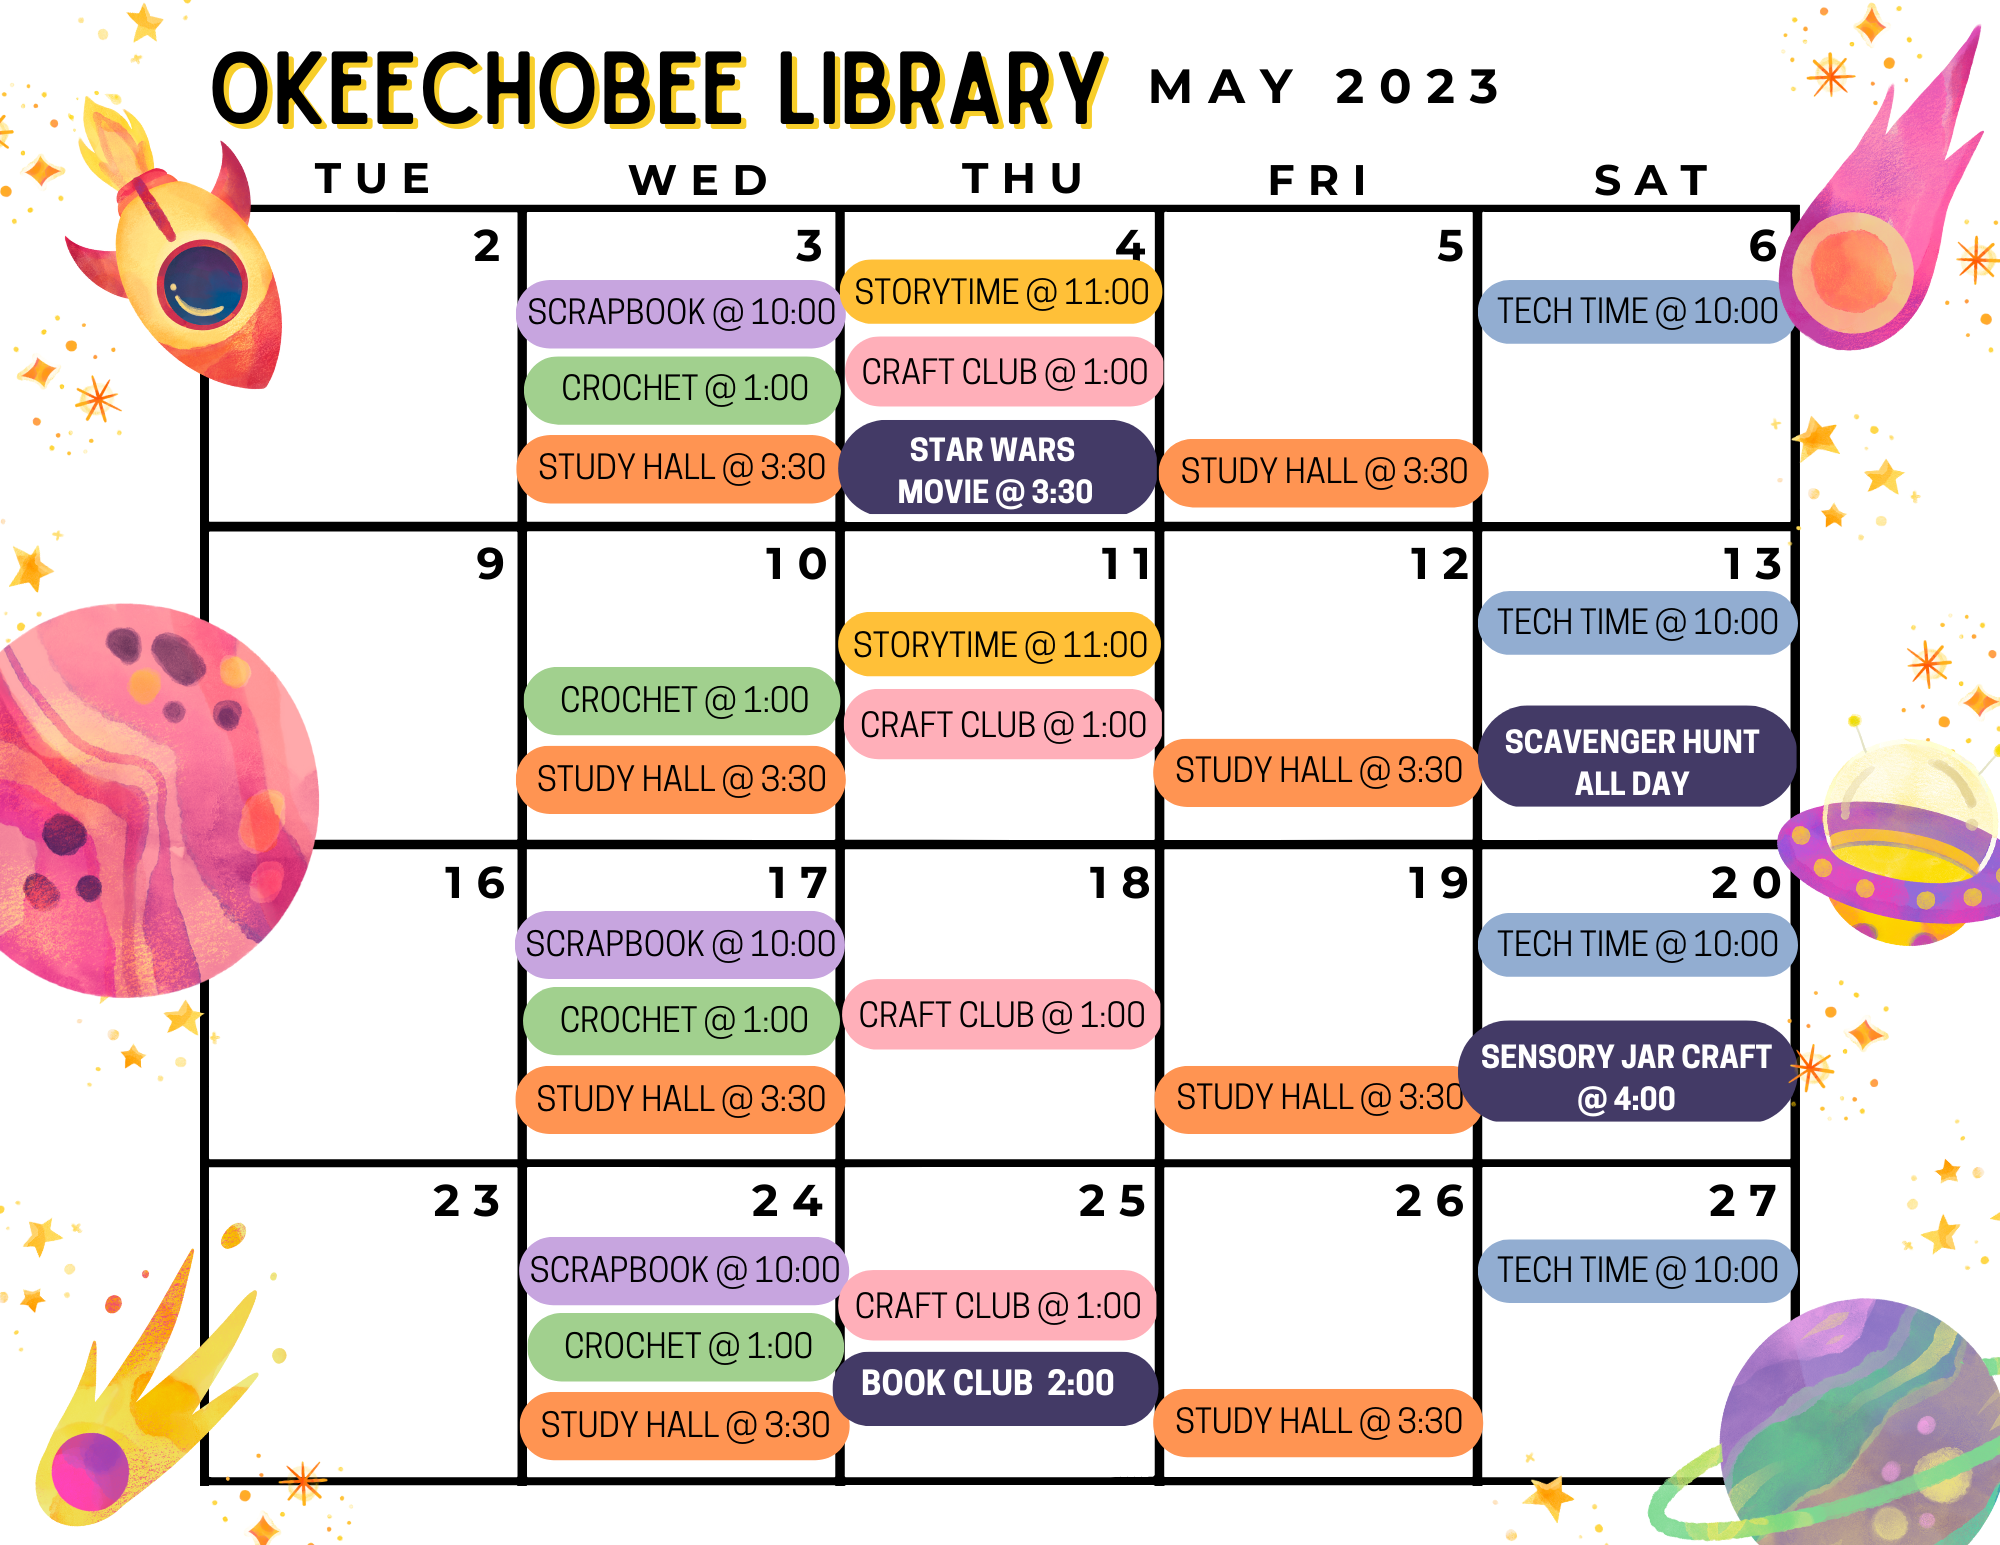 Check out the Okeechobee County Library's calendar of events for May! For more information check out our May Newsletter or call us at 863-763-3536 to find out more details!